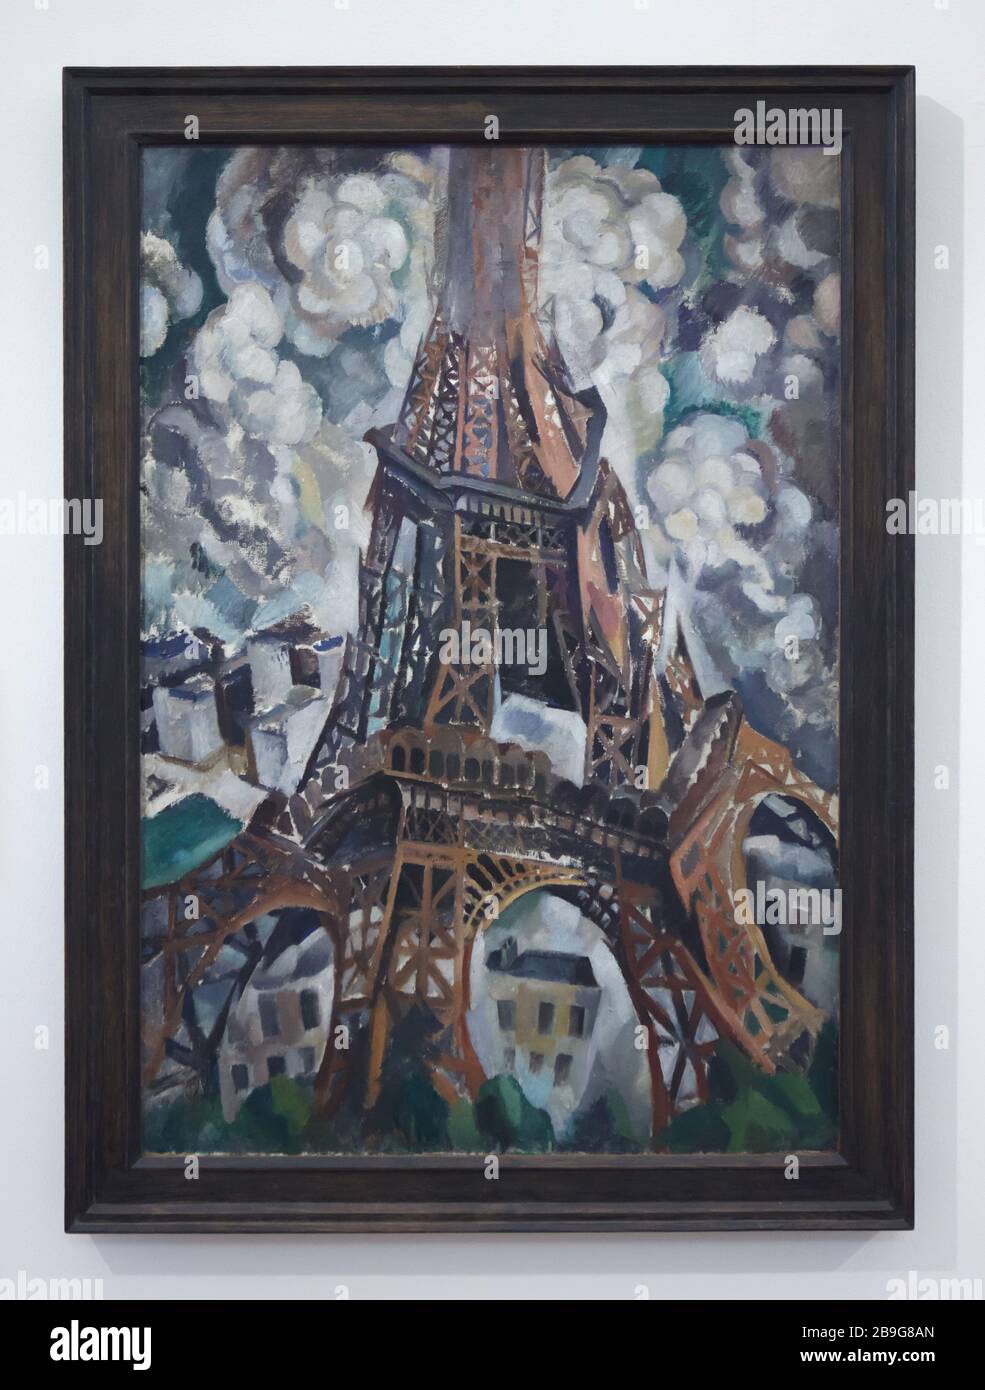 Painting 'Eiffel Tower' by French modernist painter Robert Delaunay (1909-1910) on display in the Staatliche Kunsthalle Karlsruhe (State Art Gallery) in Karlsruhe, Baden-Württemberg, Germany. Stock Photo